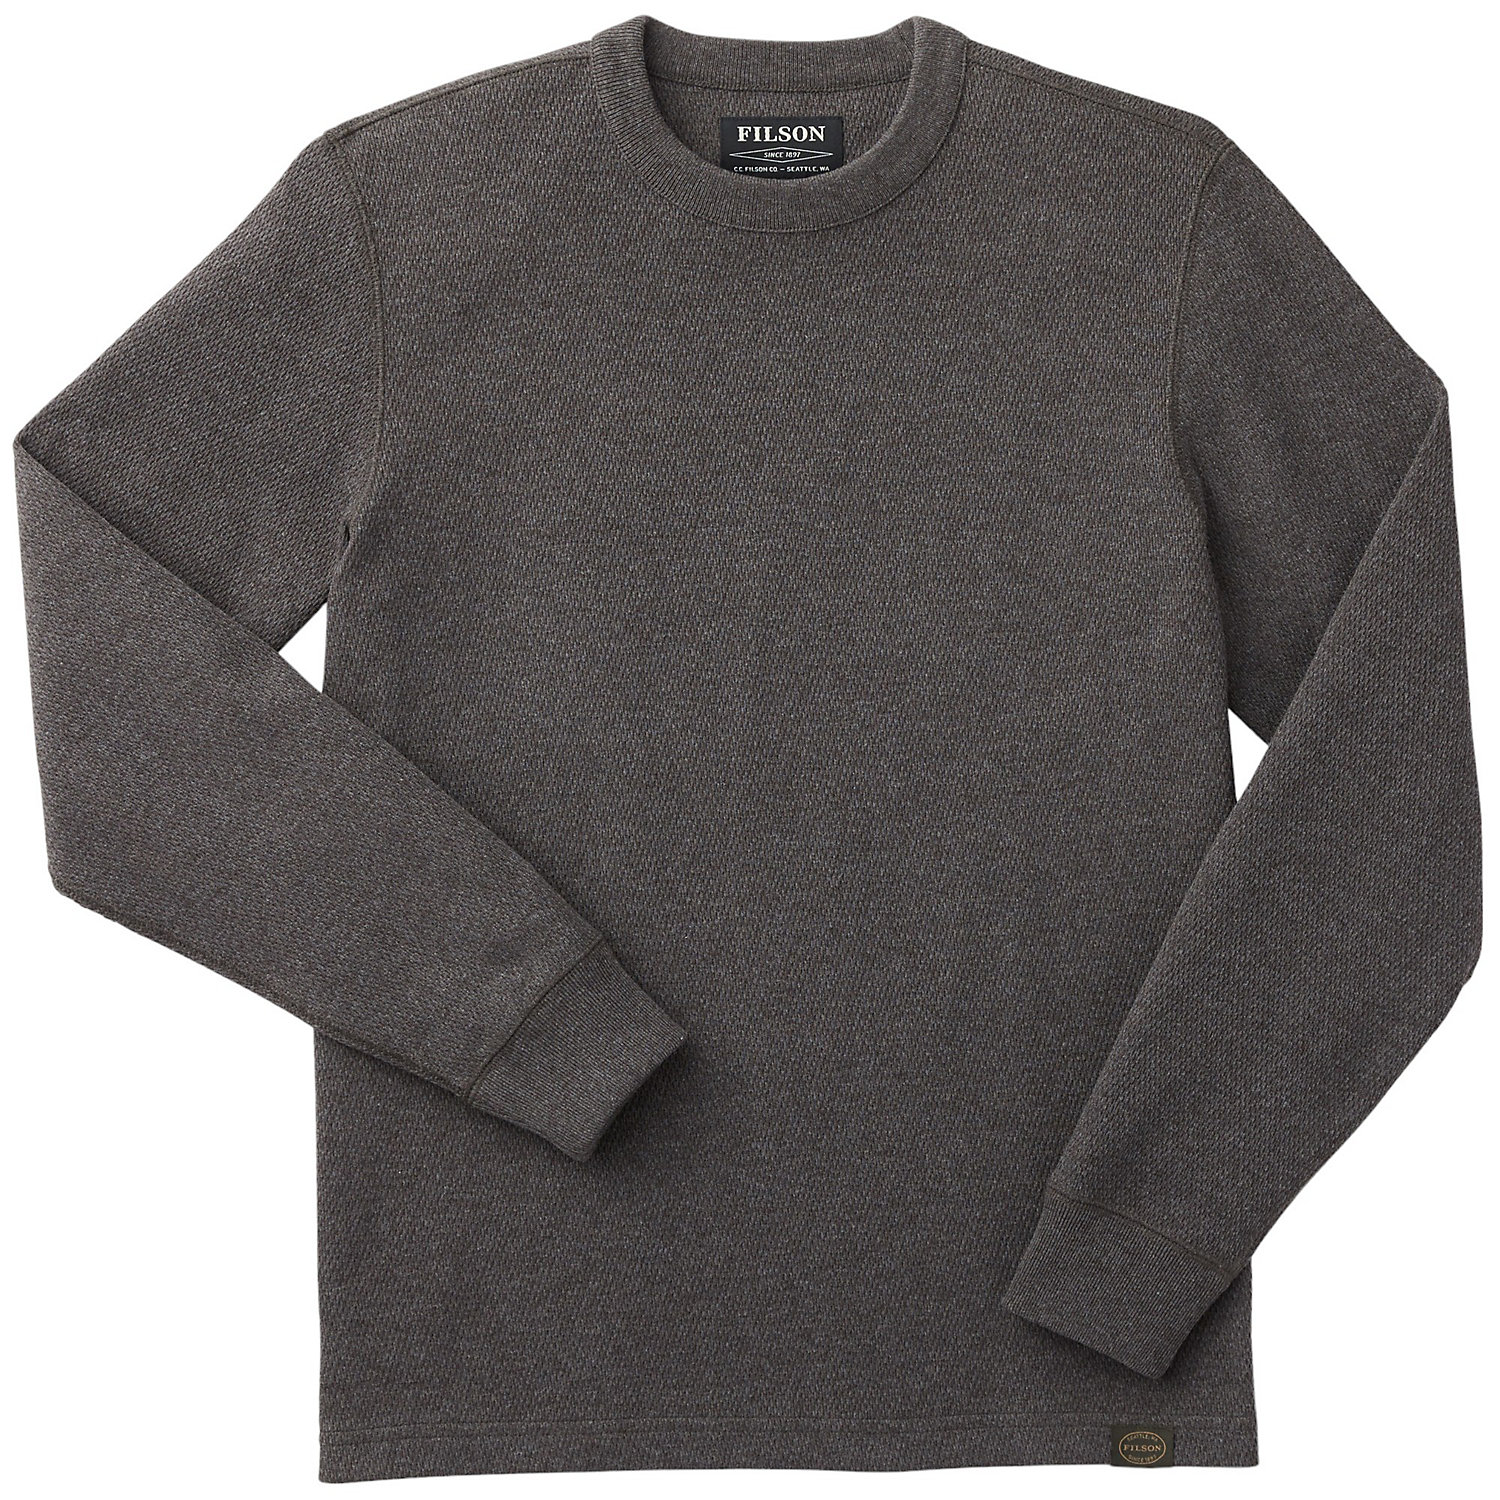 Filson Mens Waffle Knit Thermal Crew Top